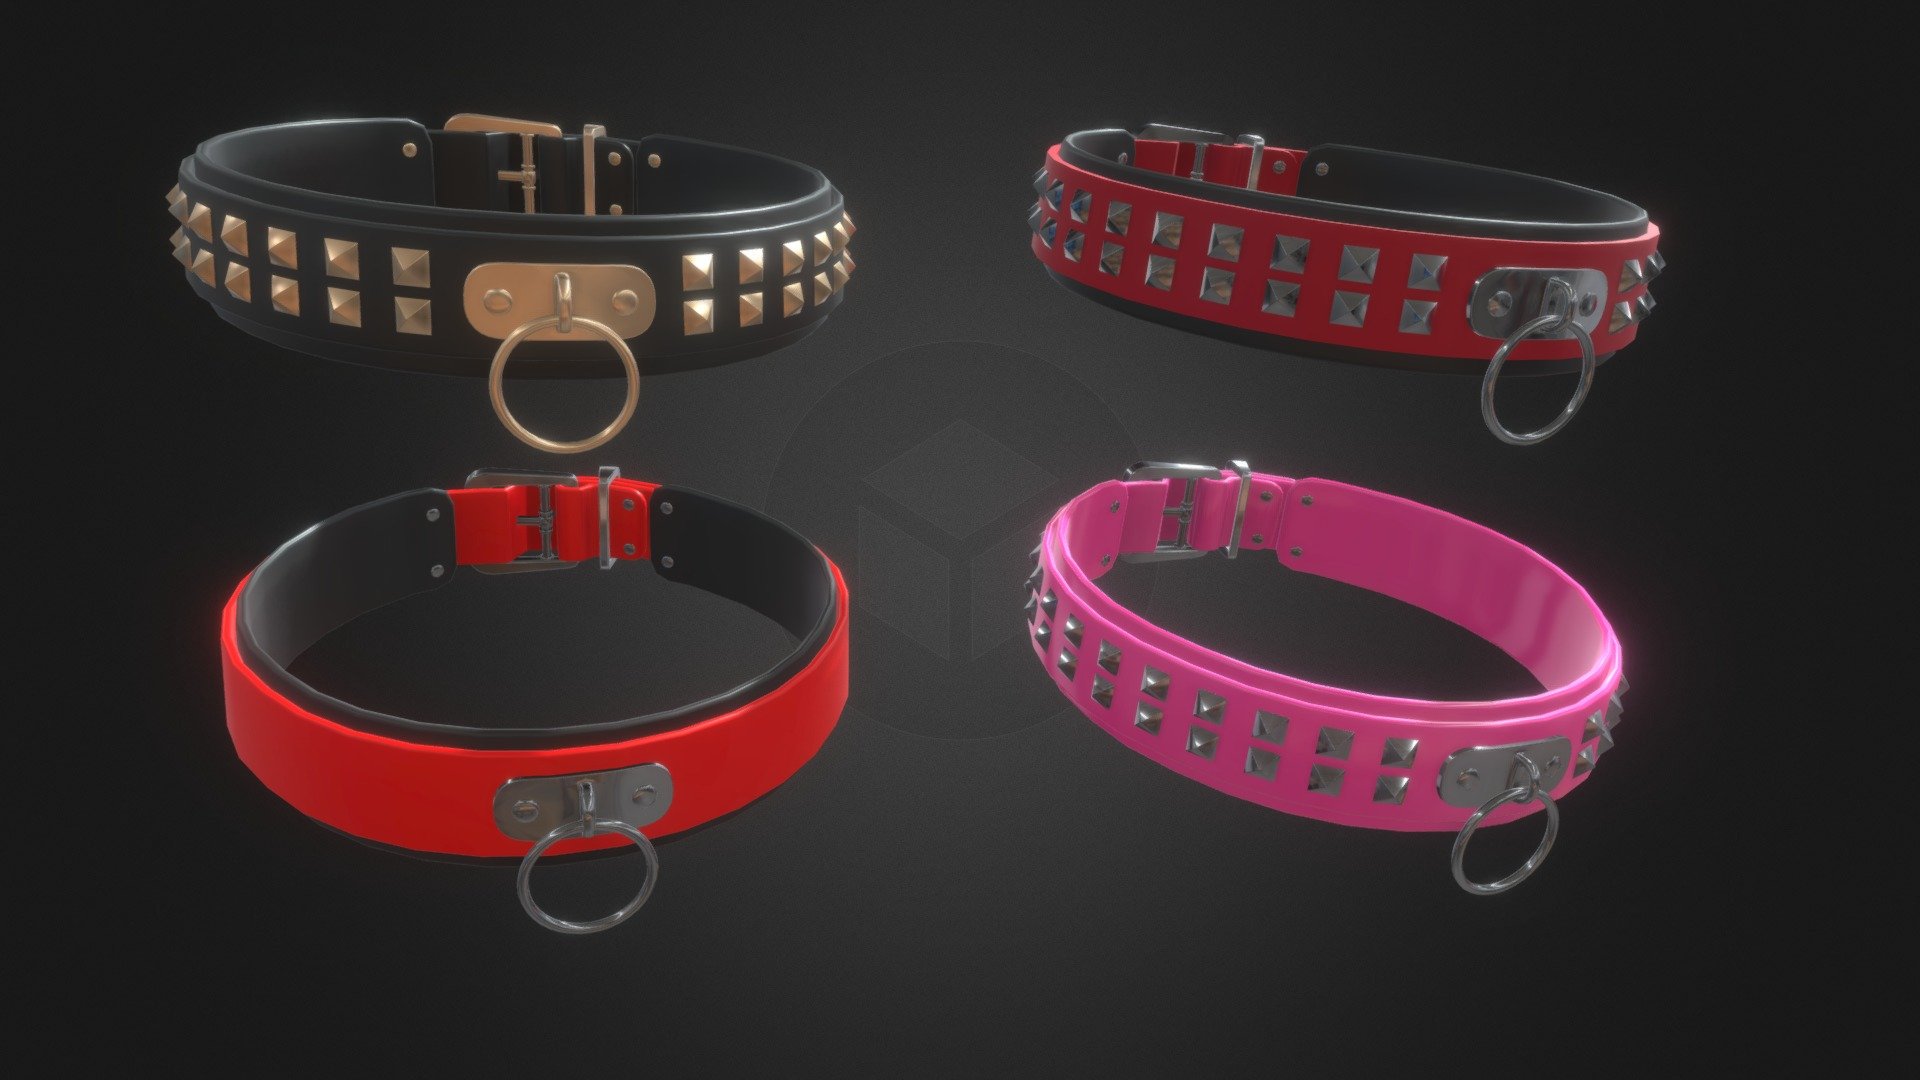 “Diana” comes in 4 finishes:




Black Leather / Rose Gold

Red Leather with white Dots / Chrome 

Pink Latex / Chrome

Purple Leather / Nickel Silver

The leather straps have a Subdivision modifer, so it will look smoother than the preview you are seeing.

All the chokers are controlled and deformed by lattices 3d model